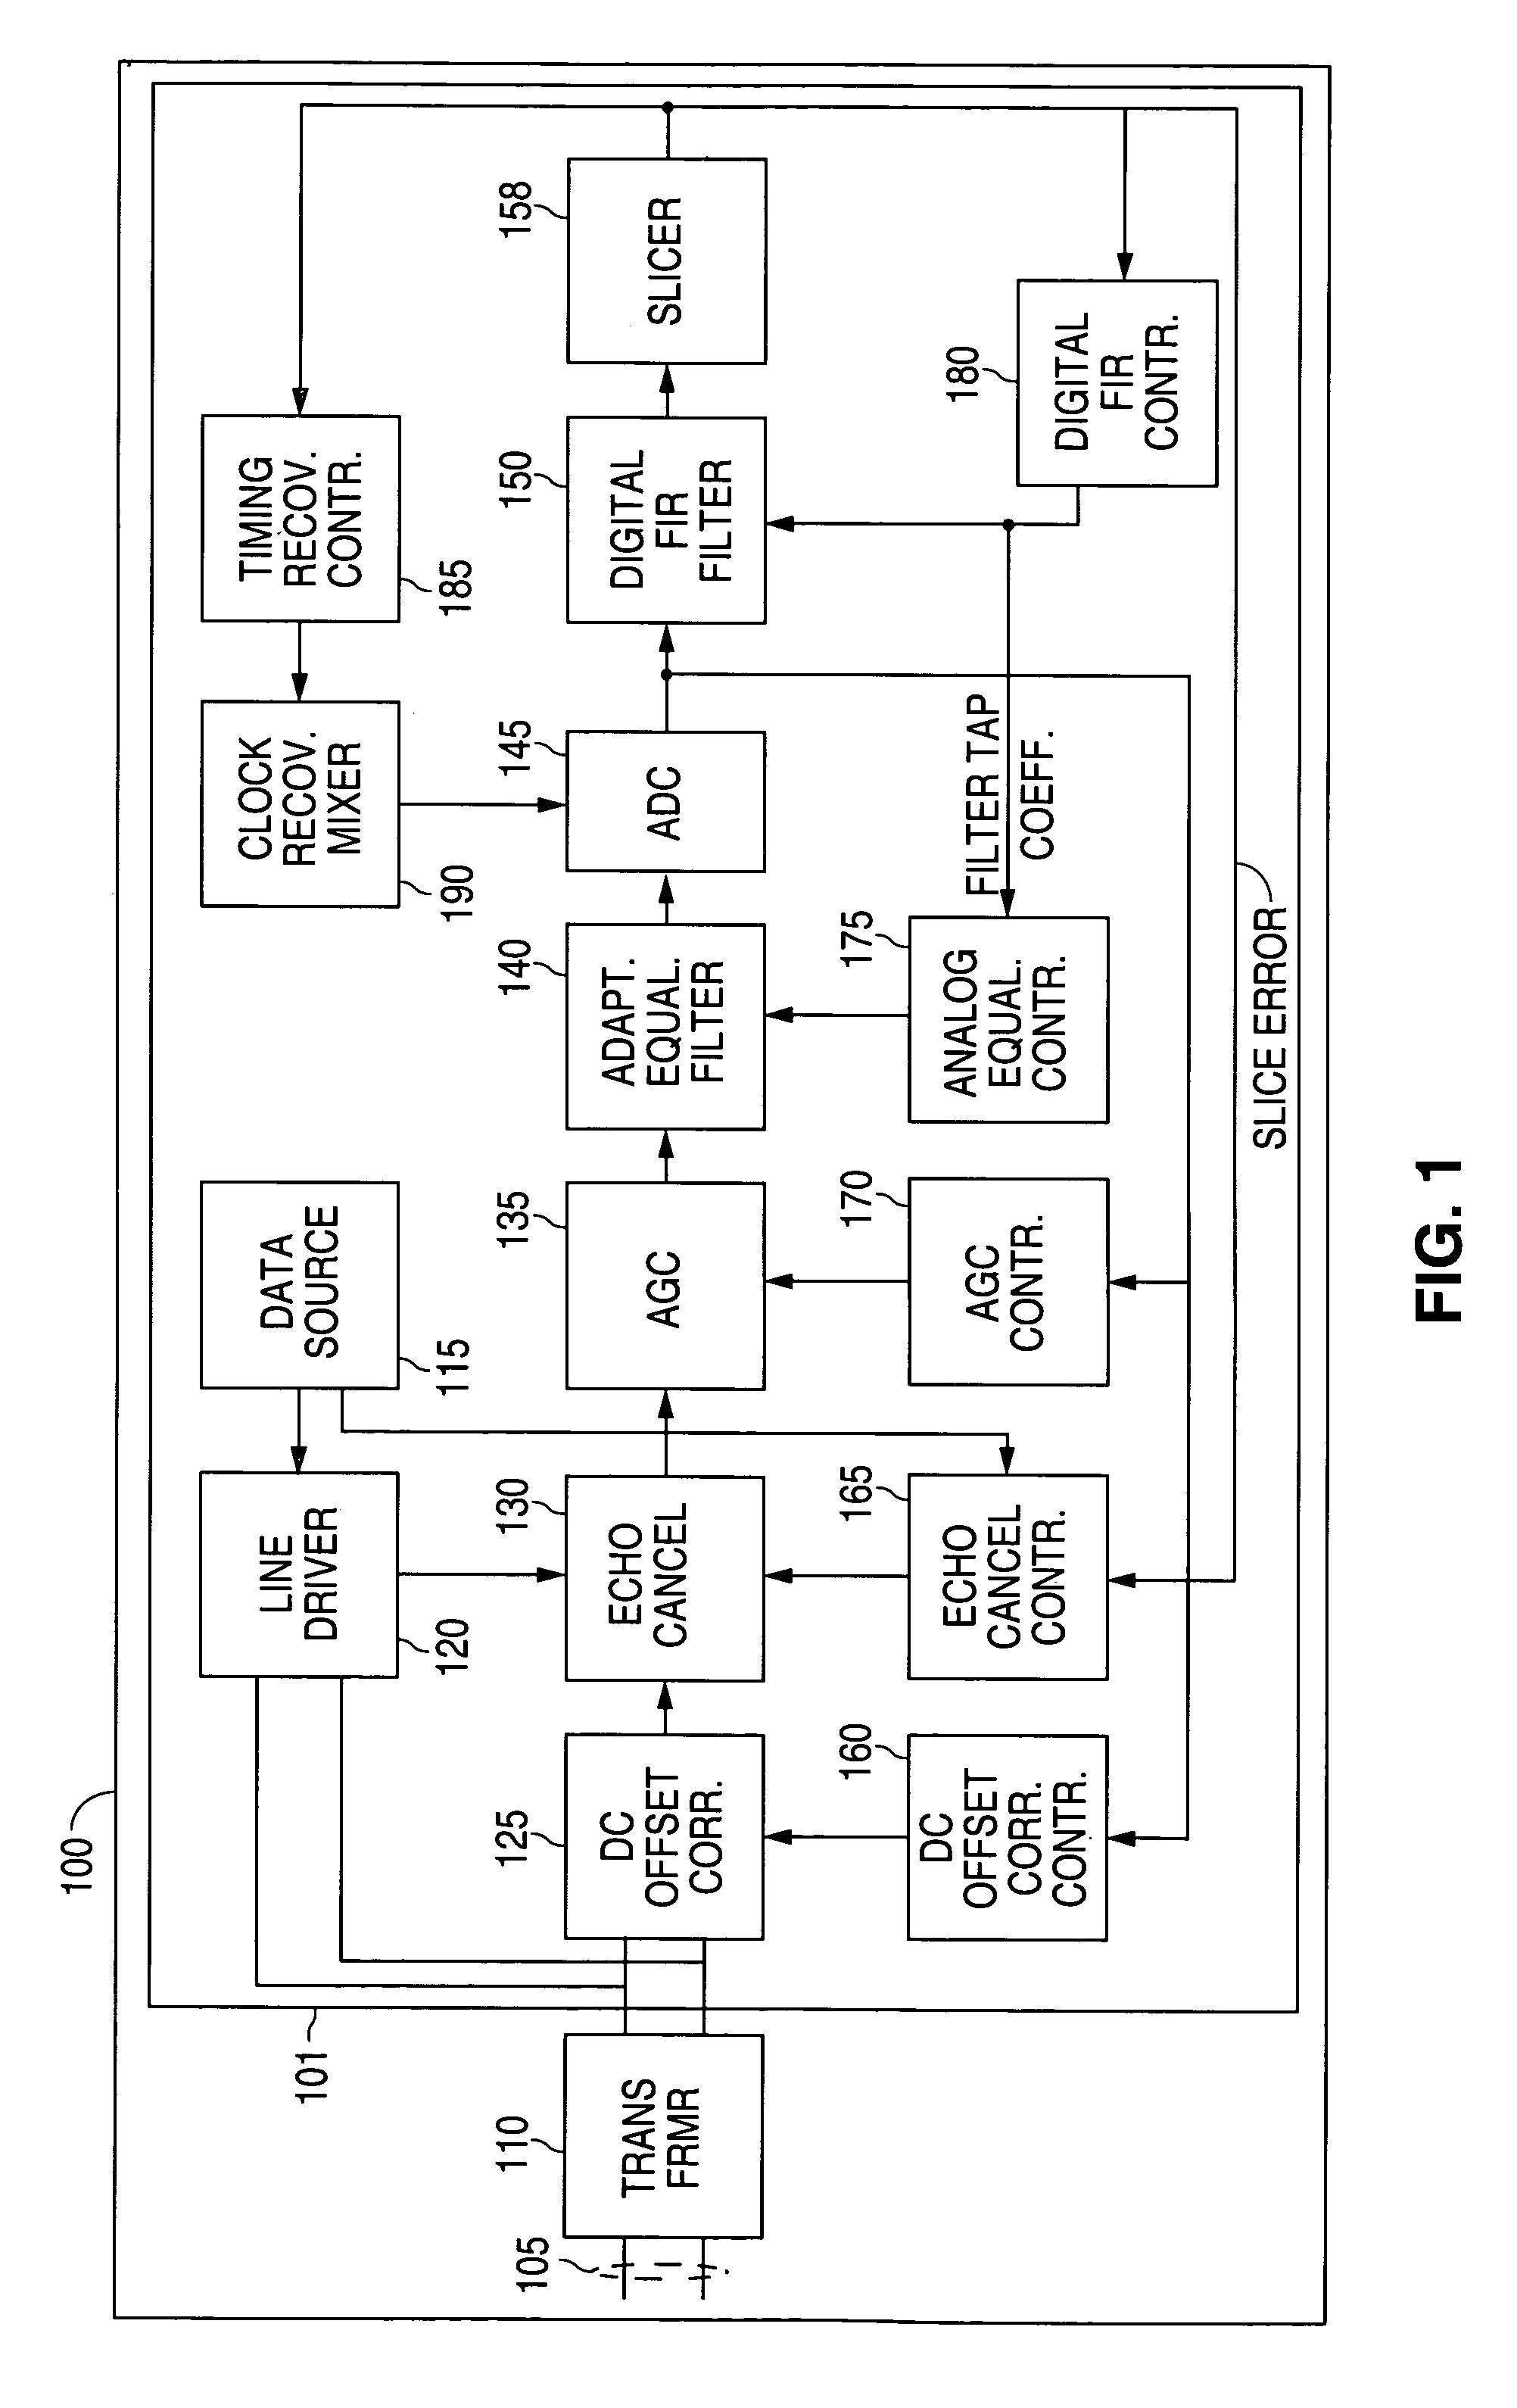 System and method for cancelling signal echoes in a full-duplex transceiver front end